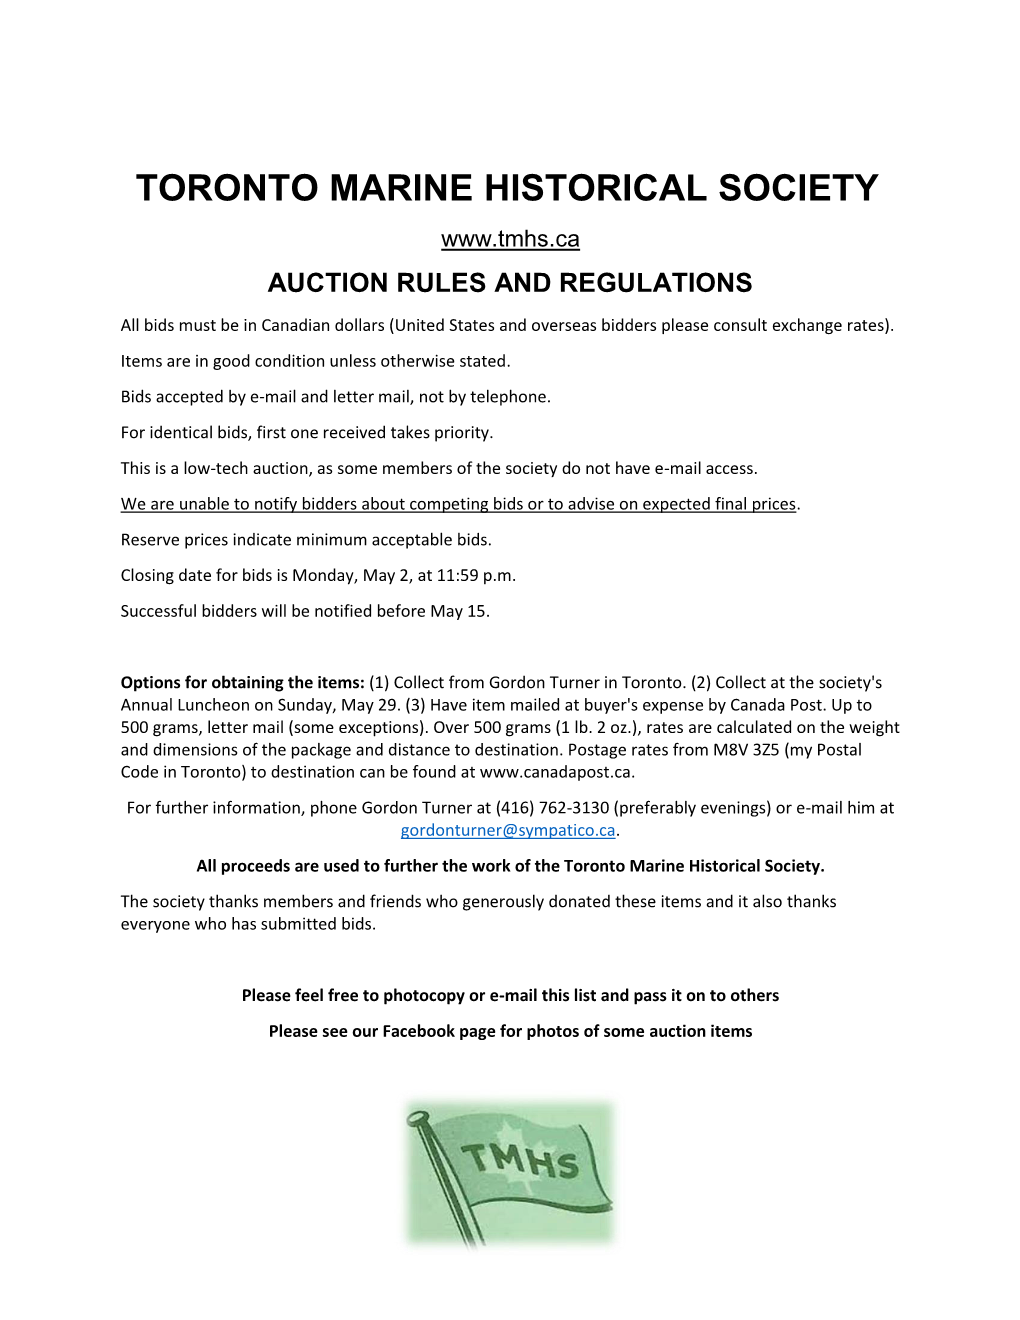 Toronto Marine Historical Society Auction Rules and Regulations